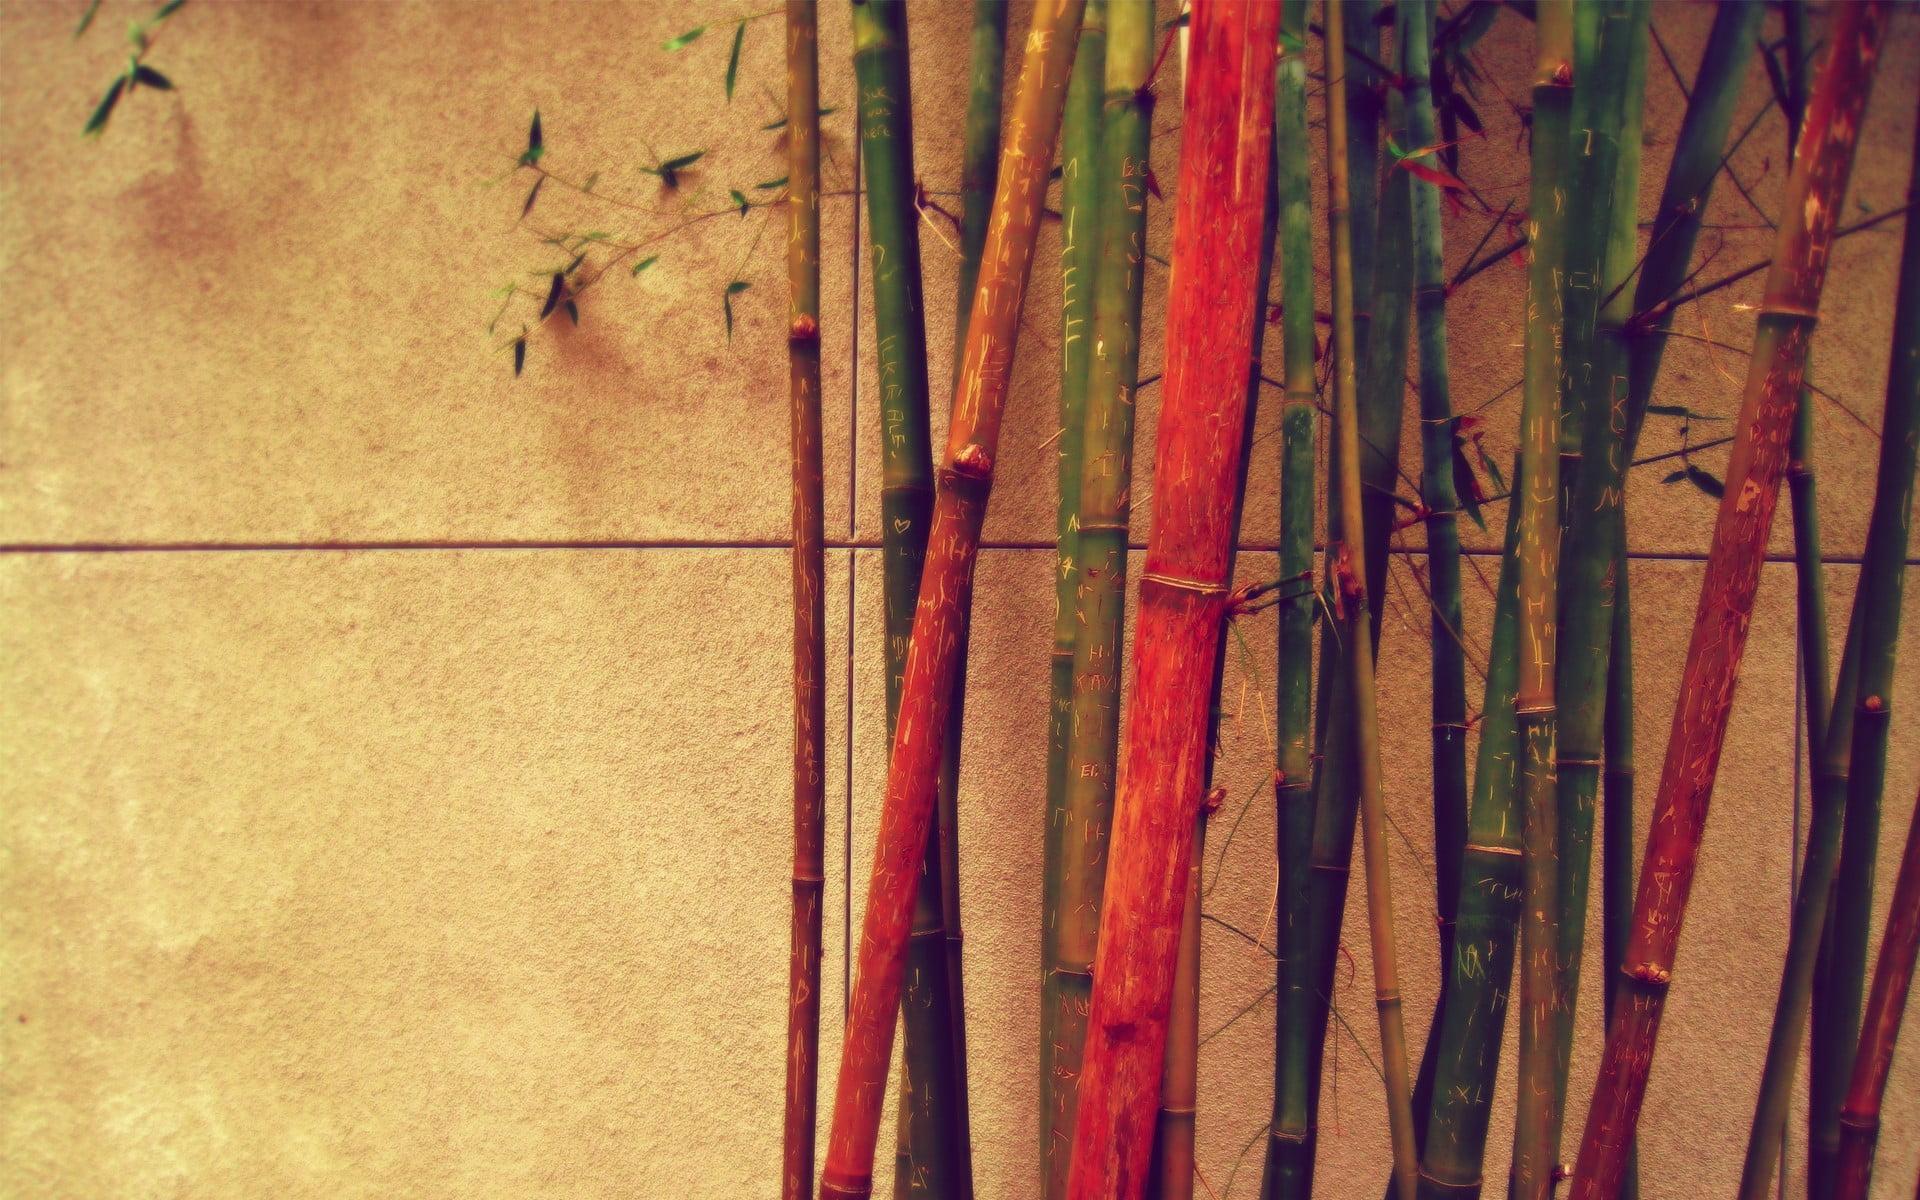 red and green bamboo lot, bamboo, colorful